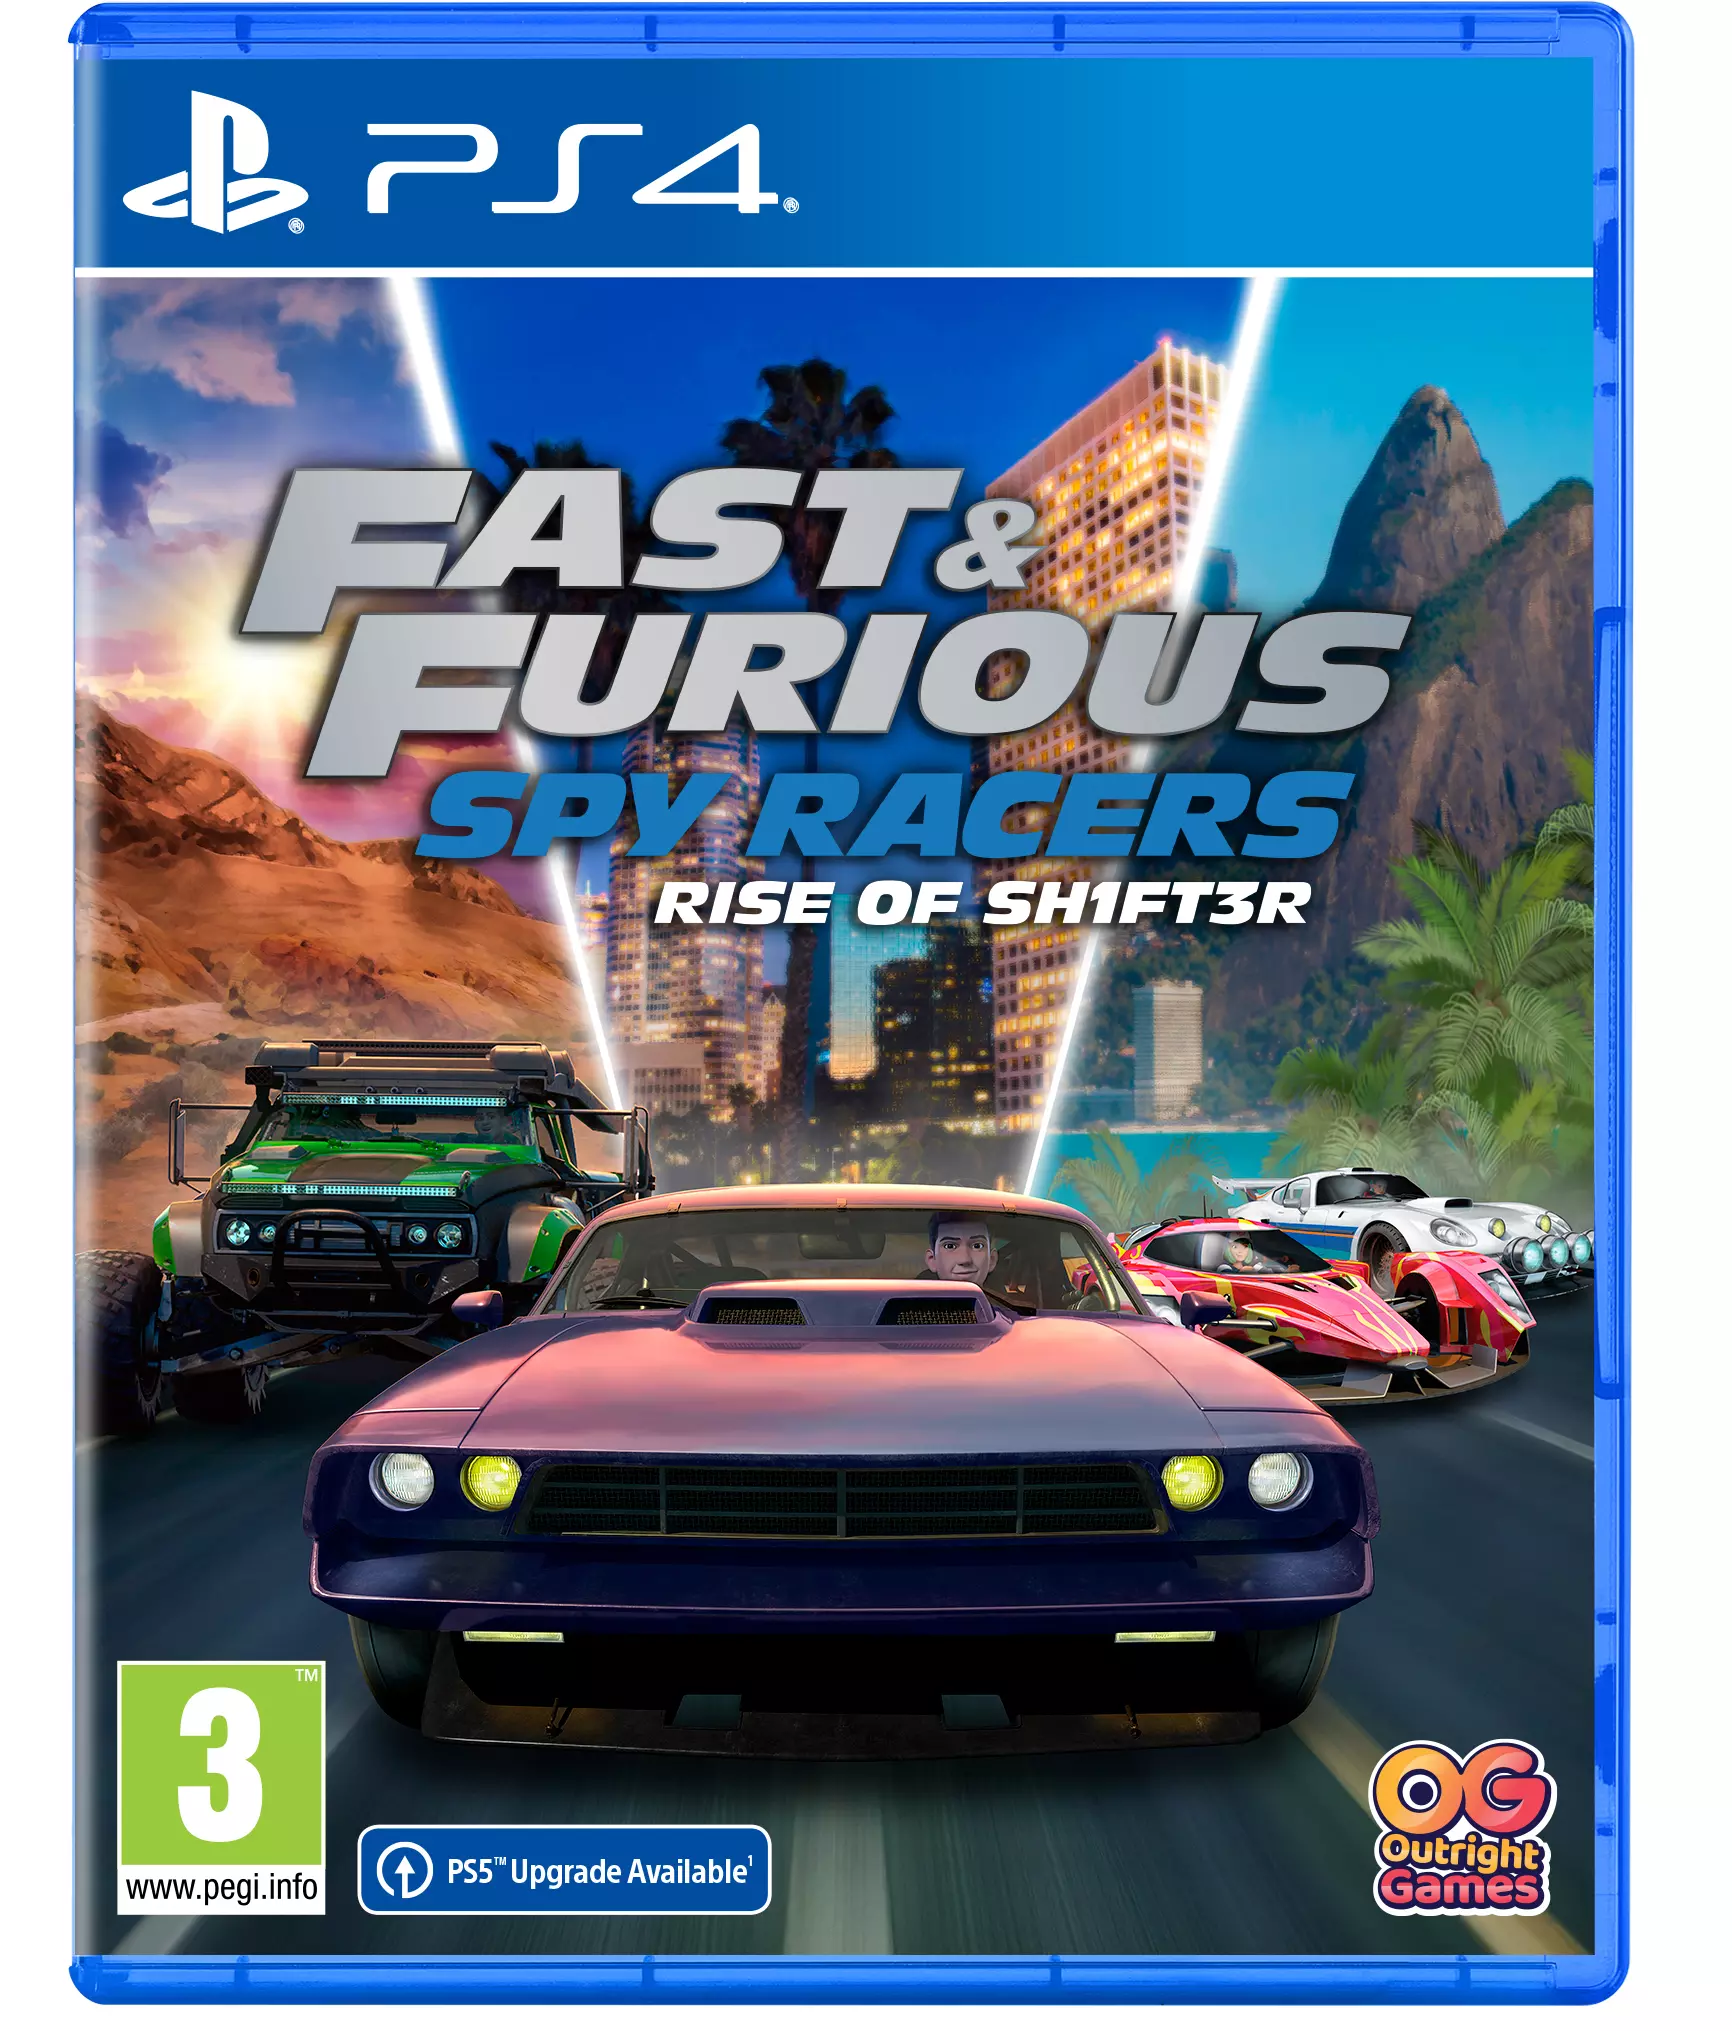 Fastfurious: Spy Racers Rise Of Sh1ft3r